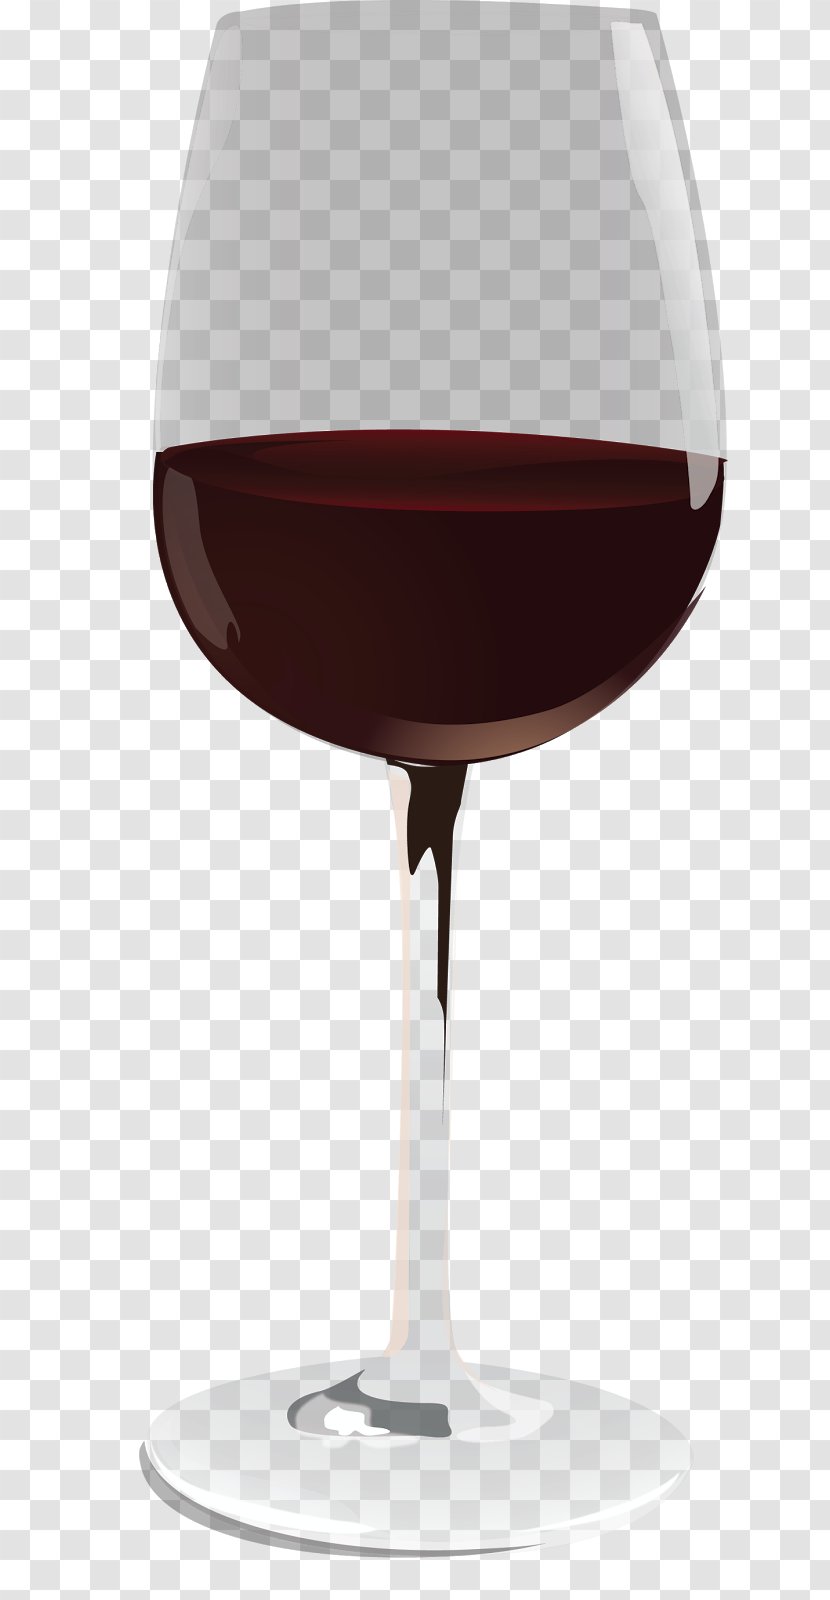 Wine Glass Rummer Red Champagne - Image Resolution Transparent PNG